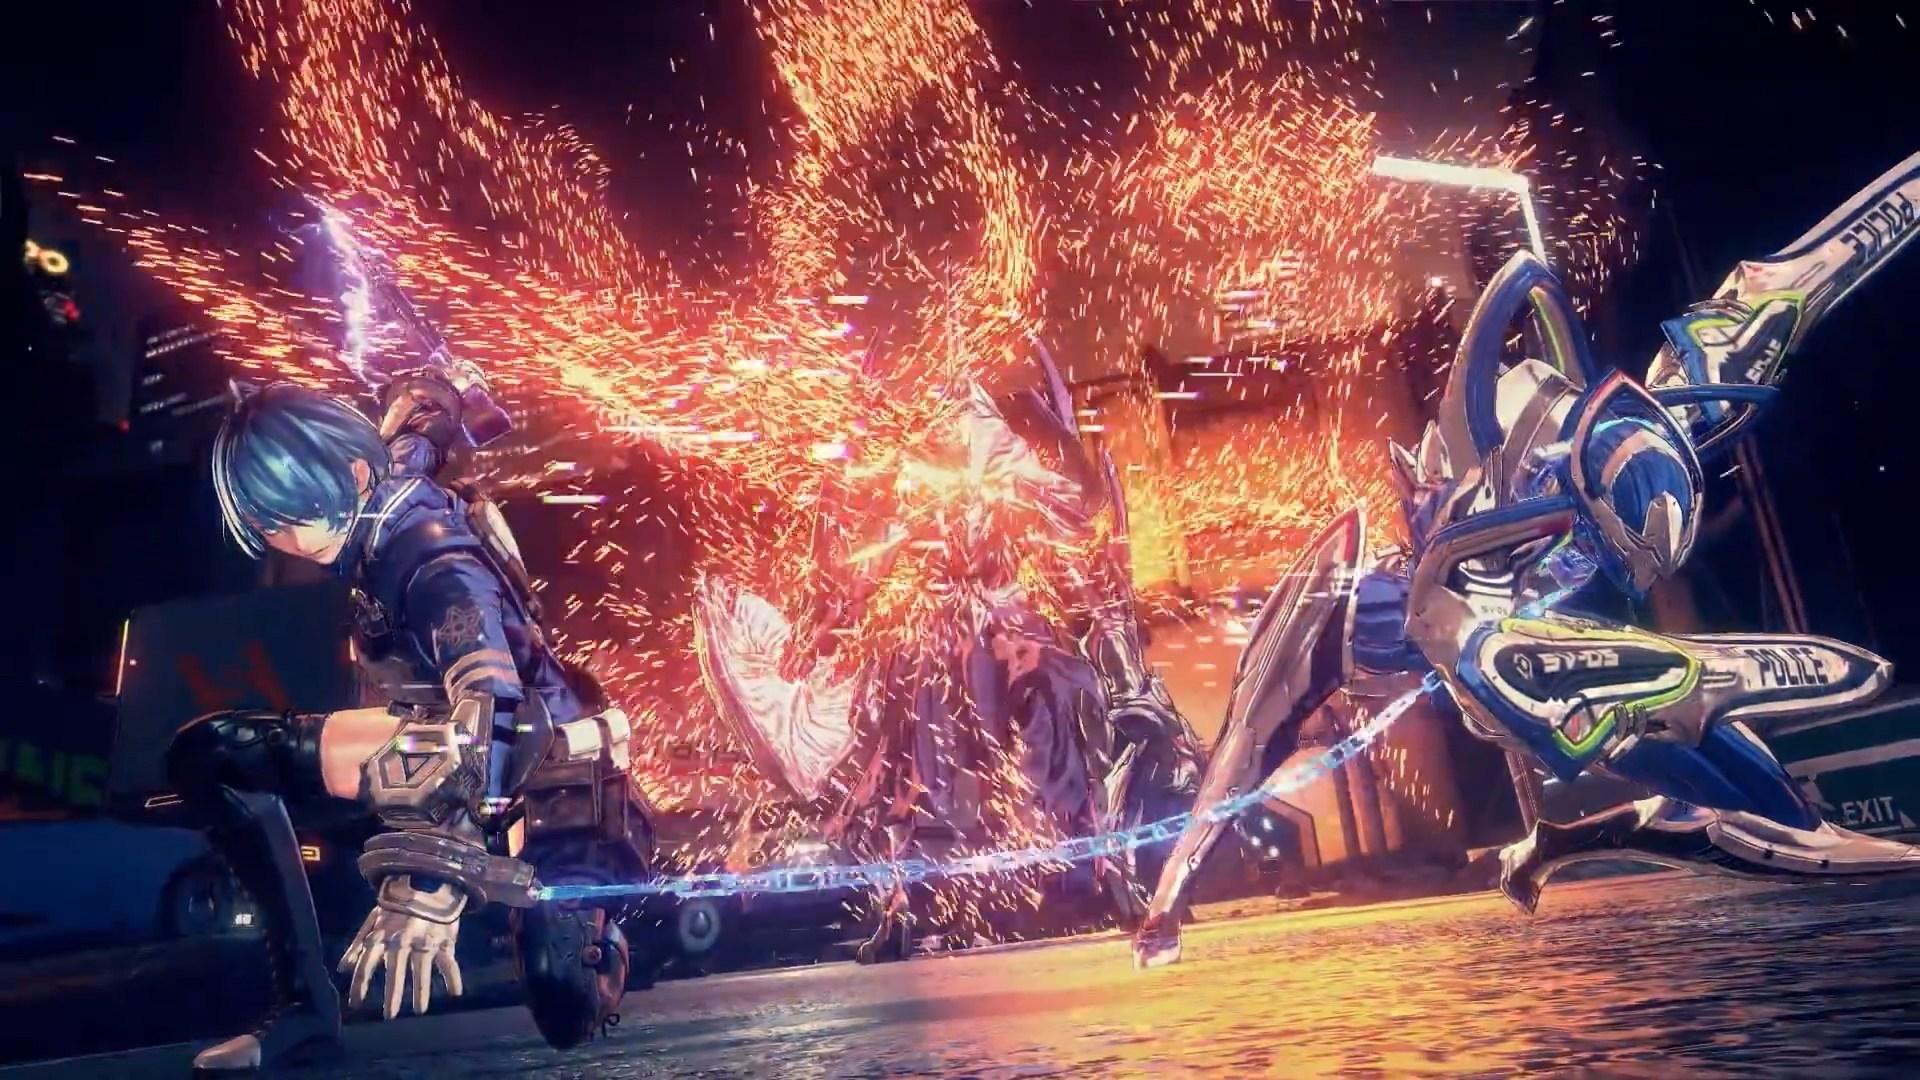 Switch: Astral Chain releases yet another Overview